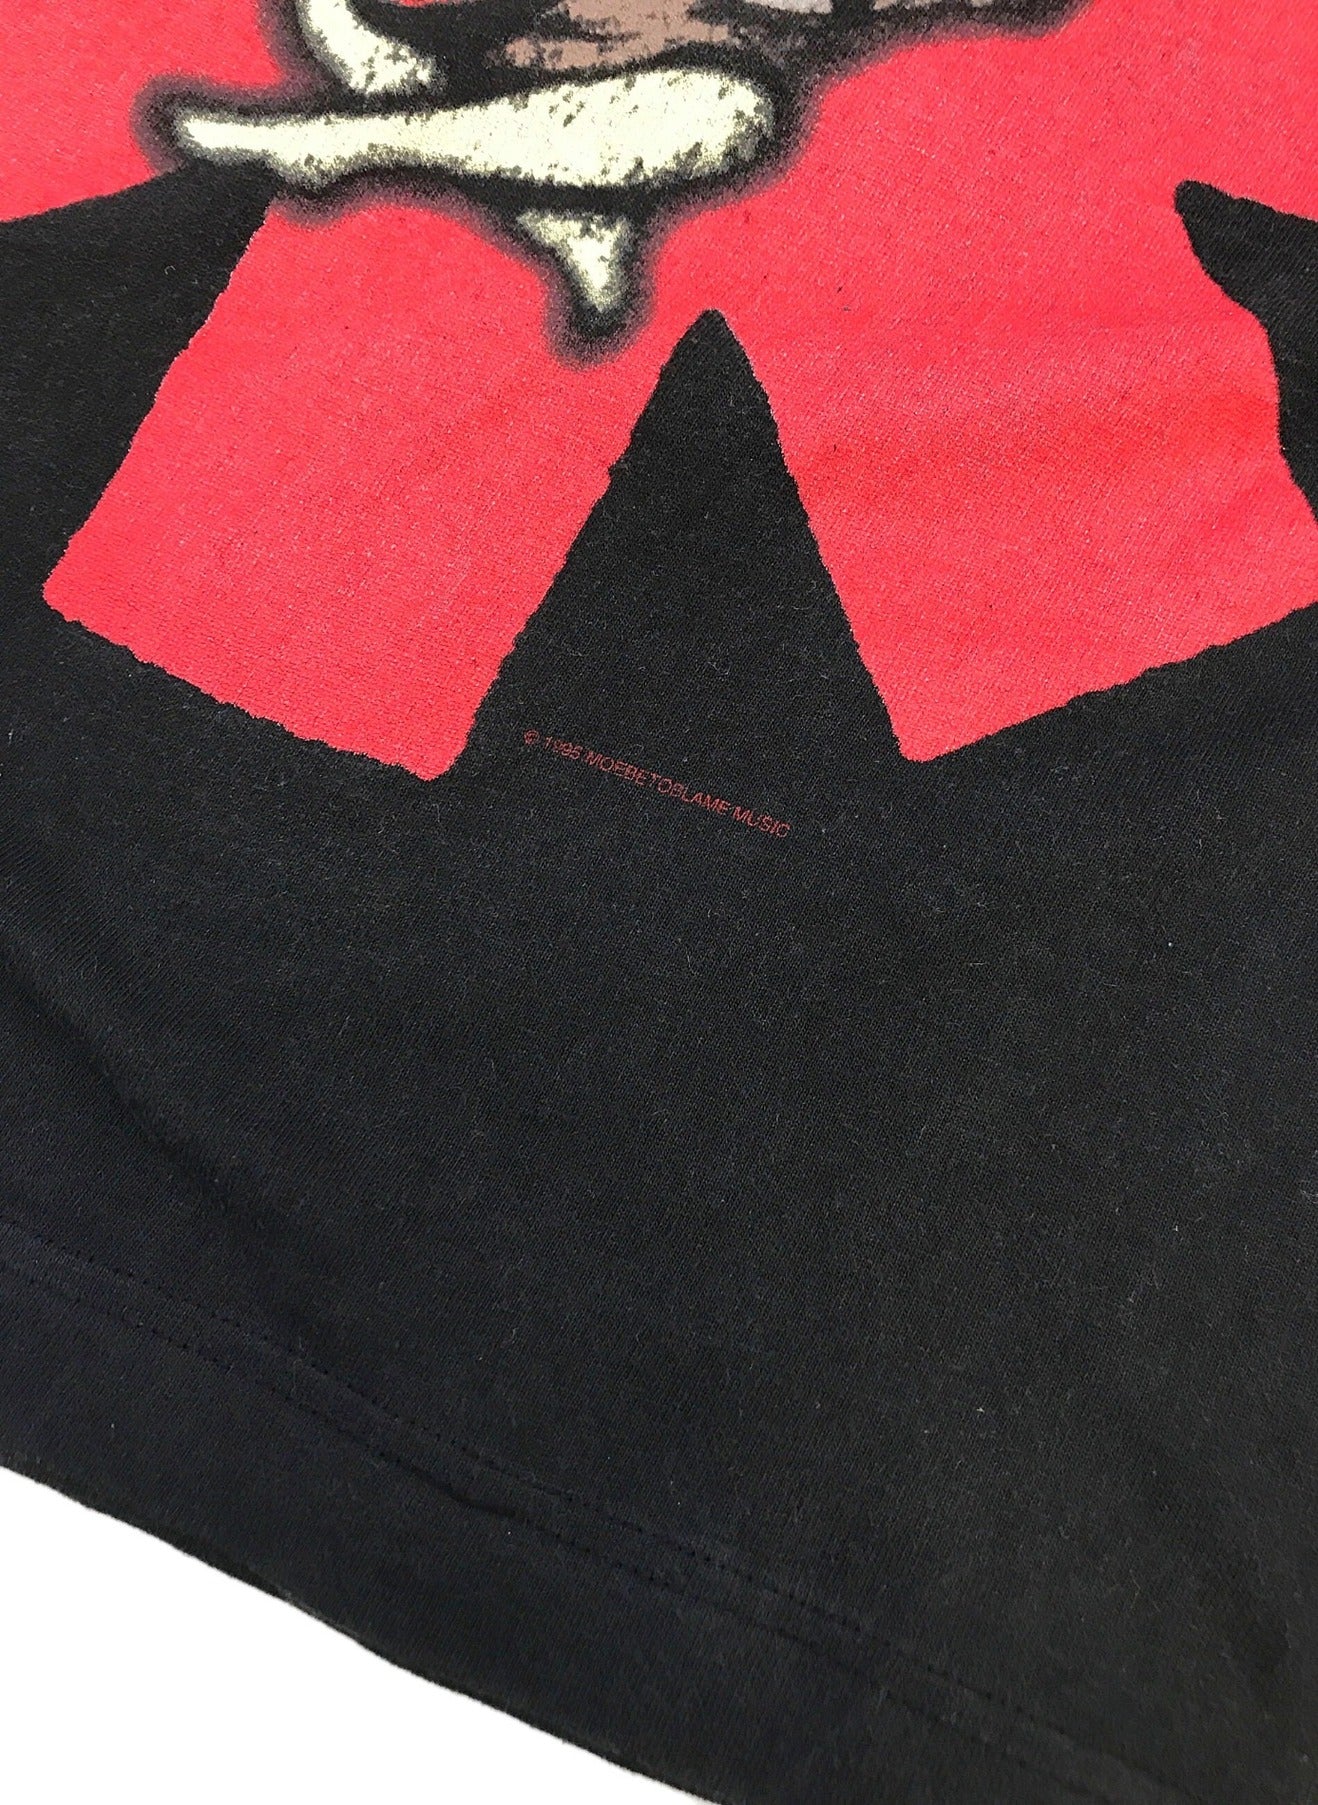 [Pre-owned] [Vintage Clothes] Red Hot Chili Peppers Band T-Shirt